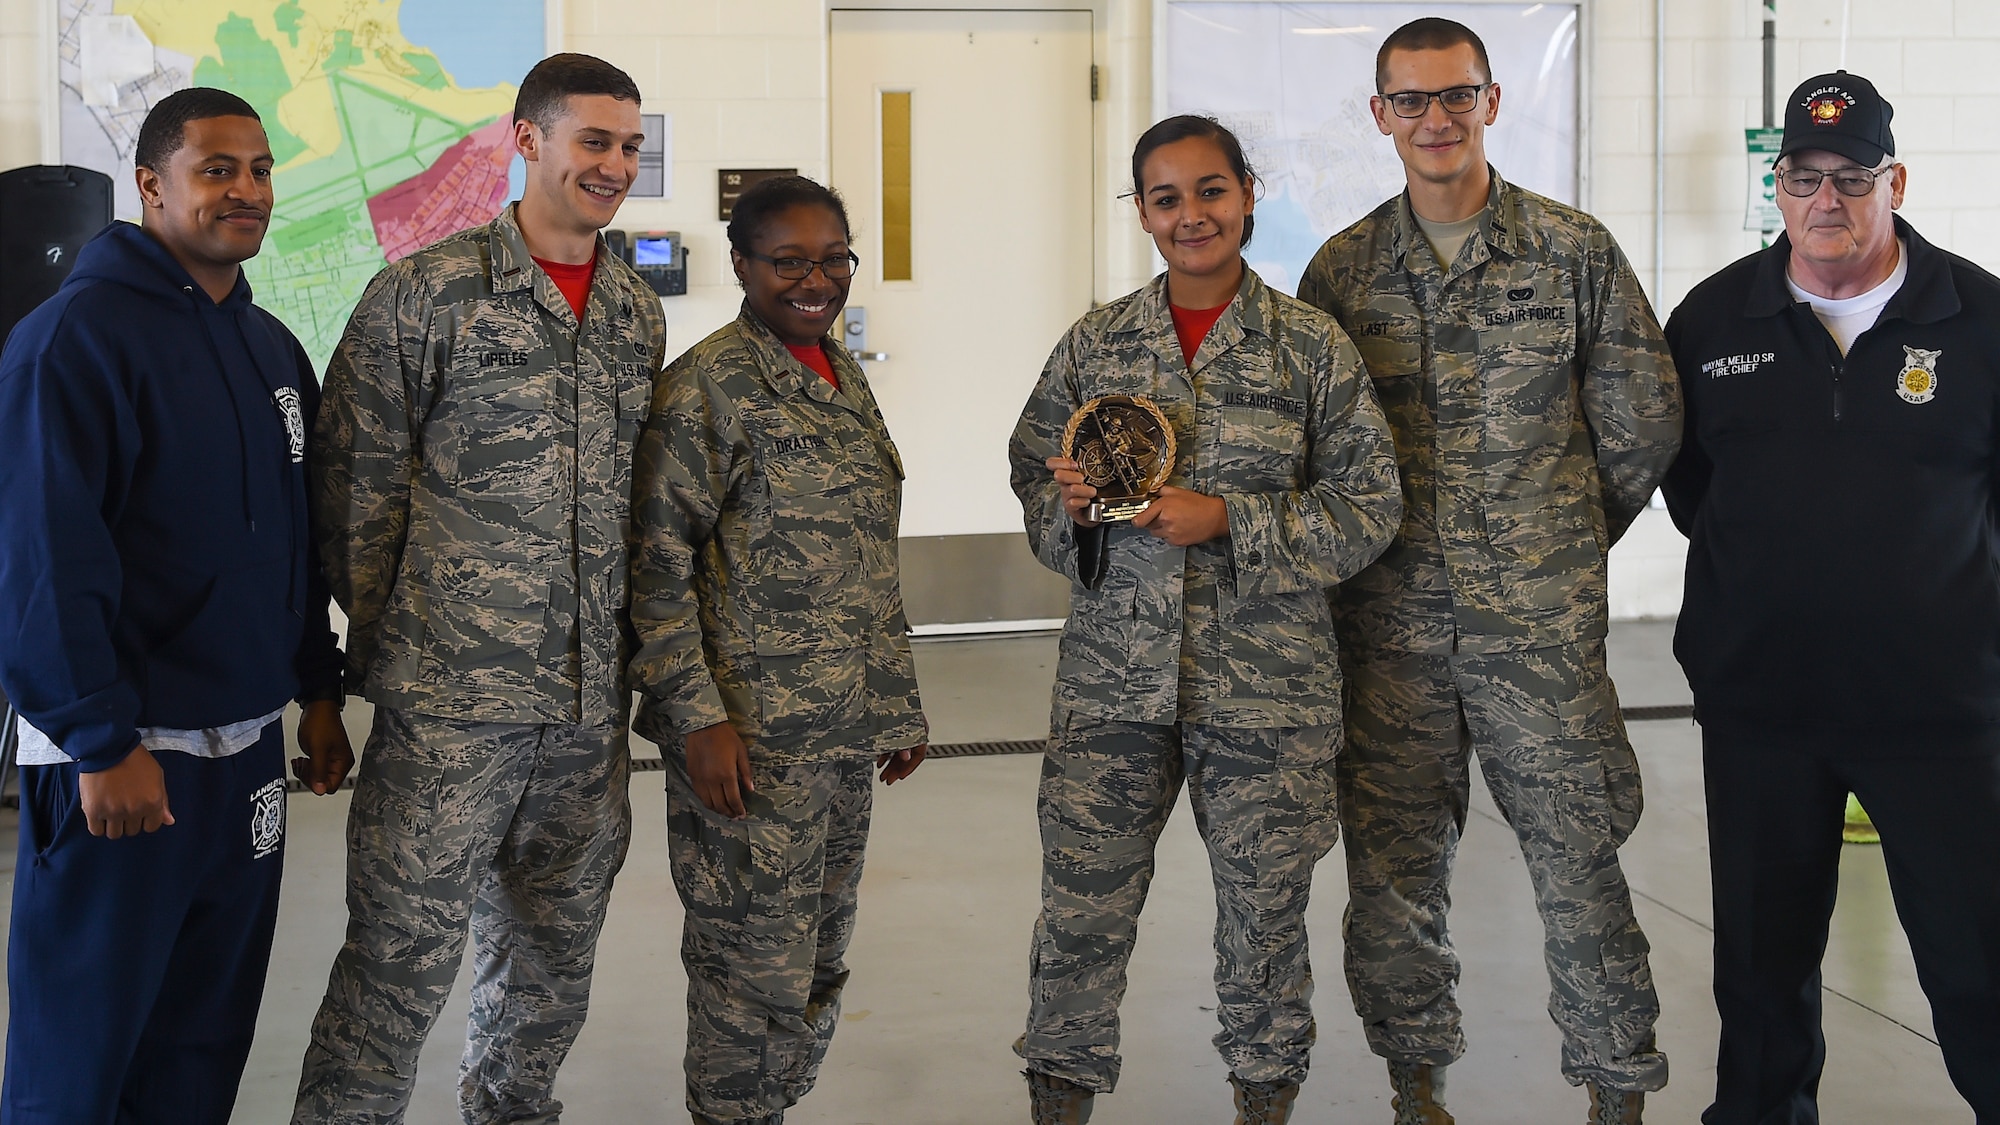 The U.S. Air Force 633rd Civil Engineer Squadron “Lt’s” placed 1st during the Fire Prevention Week competition at Joint Base Langley-Eustis, Va., Oct. 13, 2017.